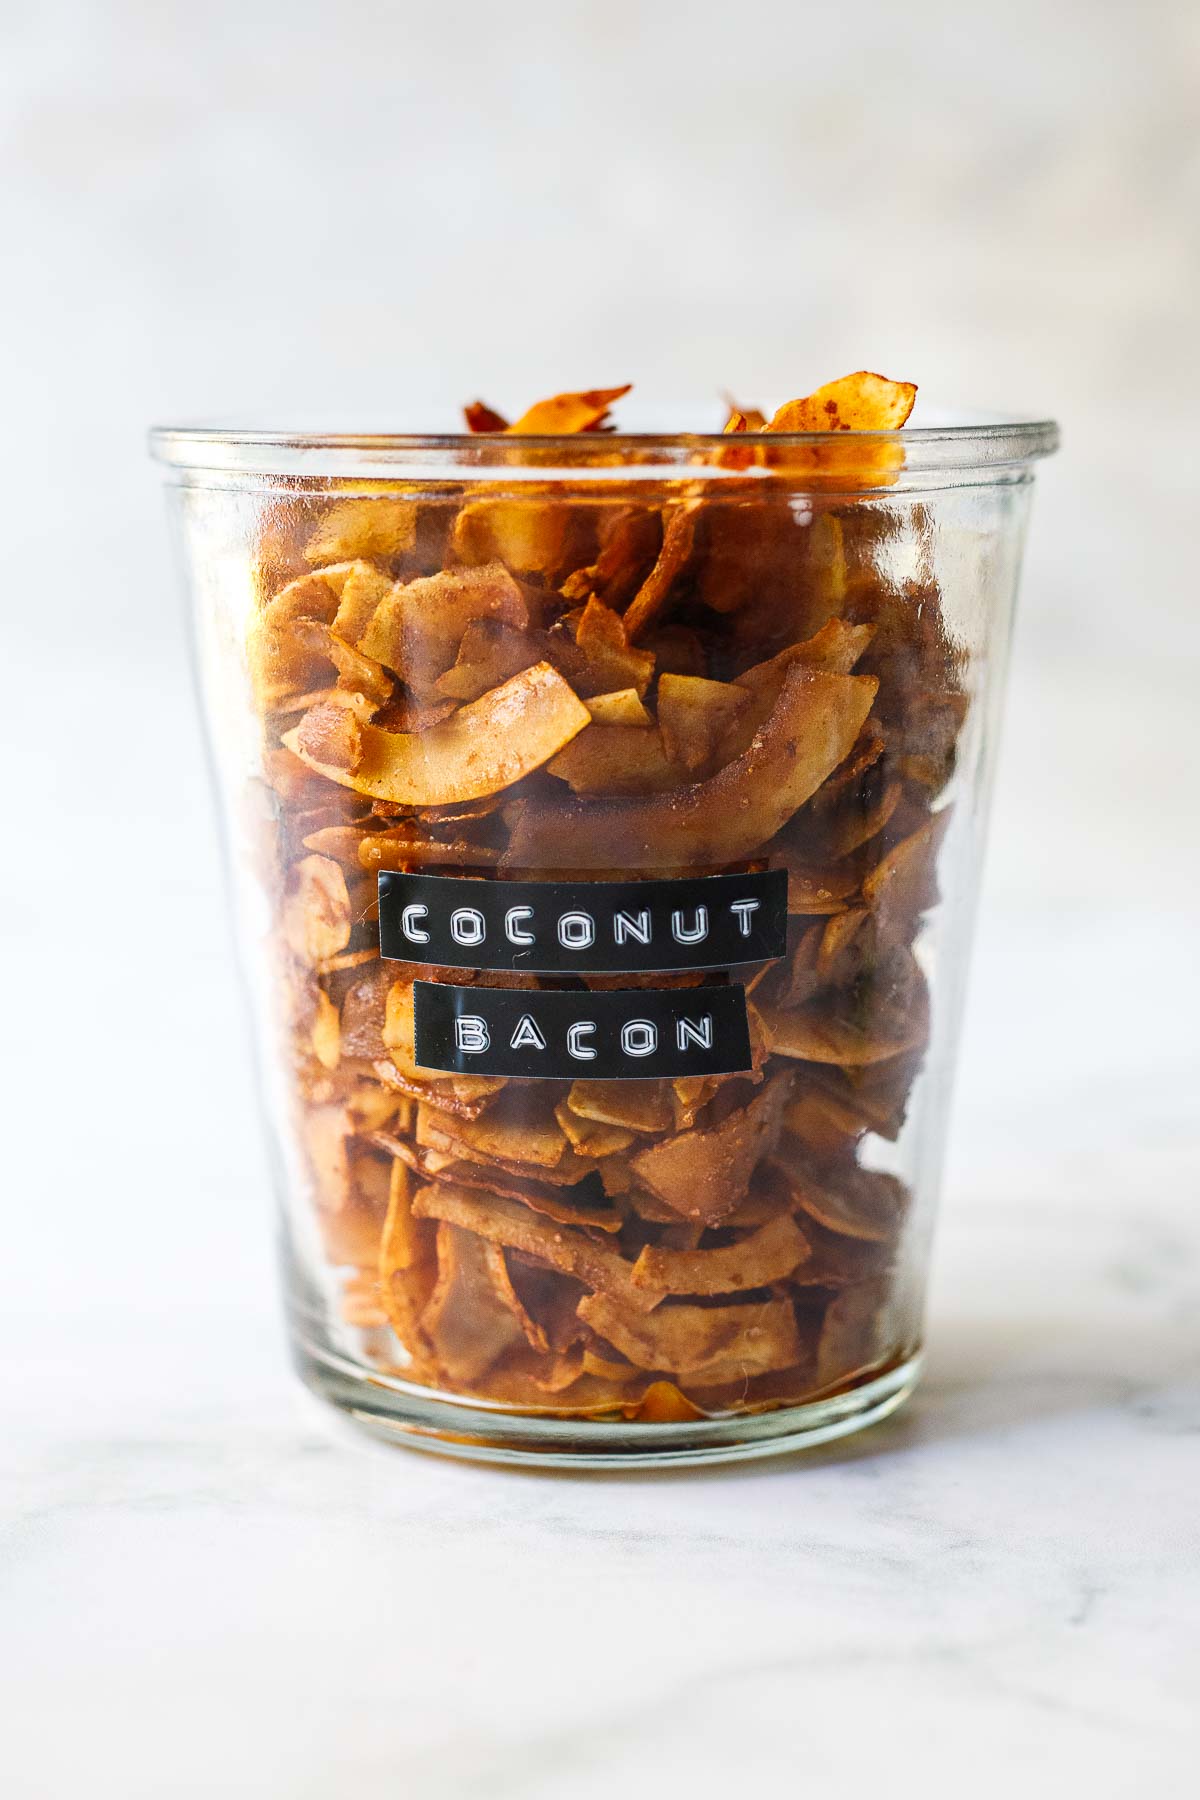 This Coconut Bacon recipe is healthy, crunchy and easy to make in about 15 minutes. A delicious savory, smoky topping for salads, soups, wraps and avocado toast!  Vegan and Gluten Free!